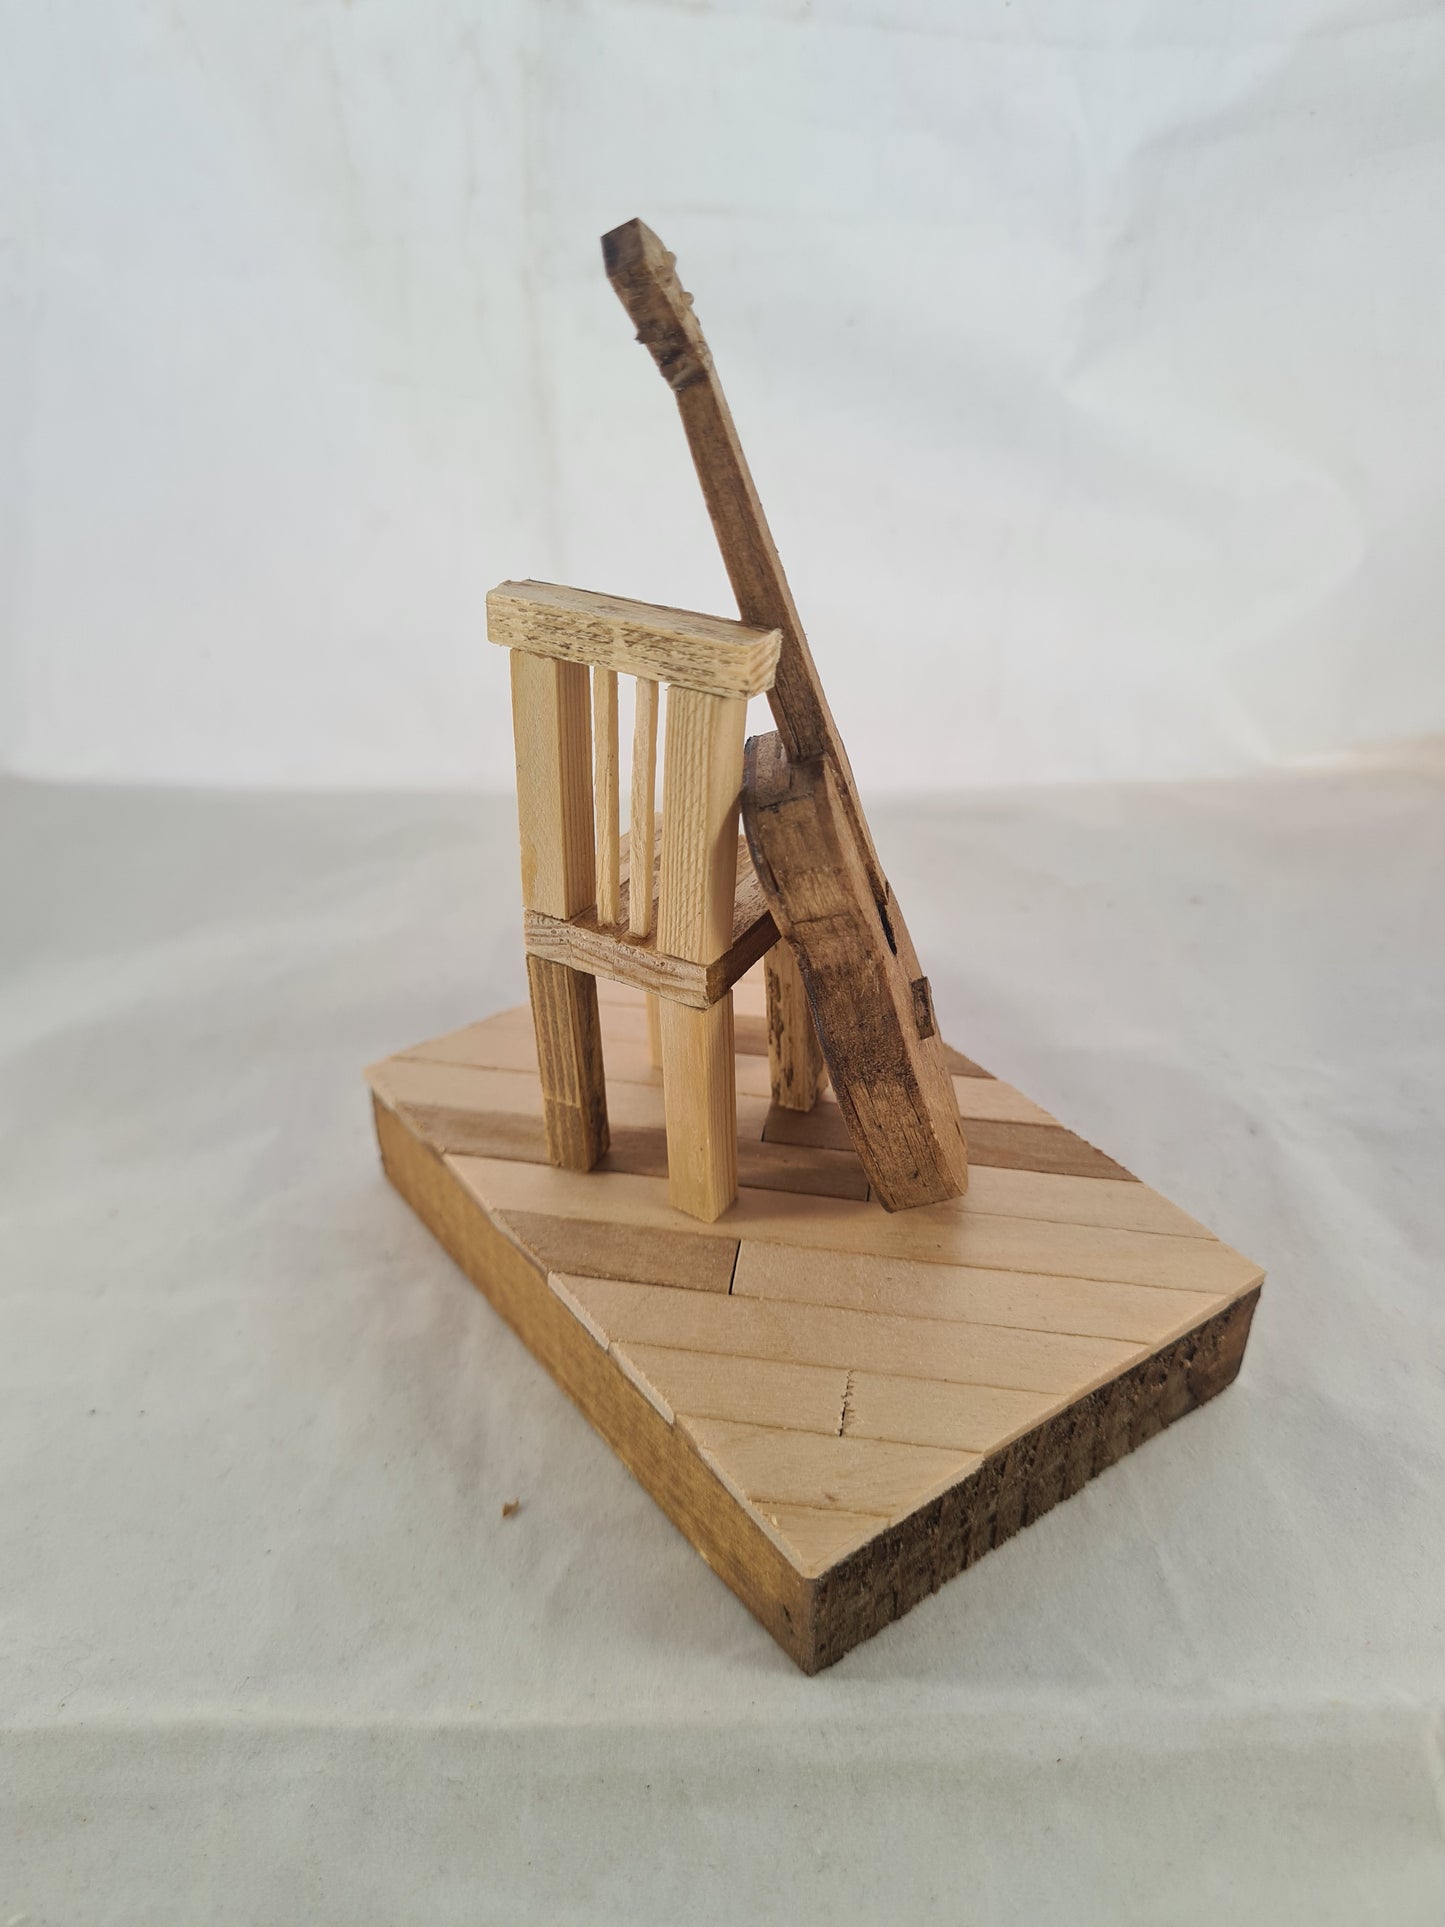 Seated Acoustic - Handcrafted Wooden Matchstick Figures - Gifts, Ornaments and Decor By Tiggidy Designs